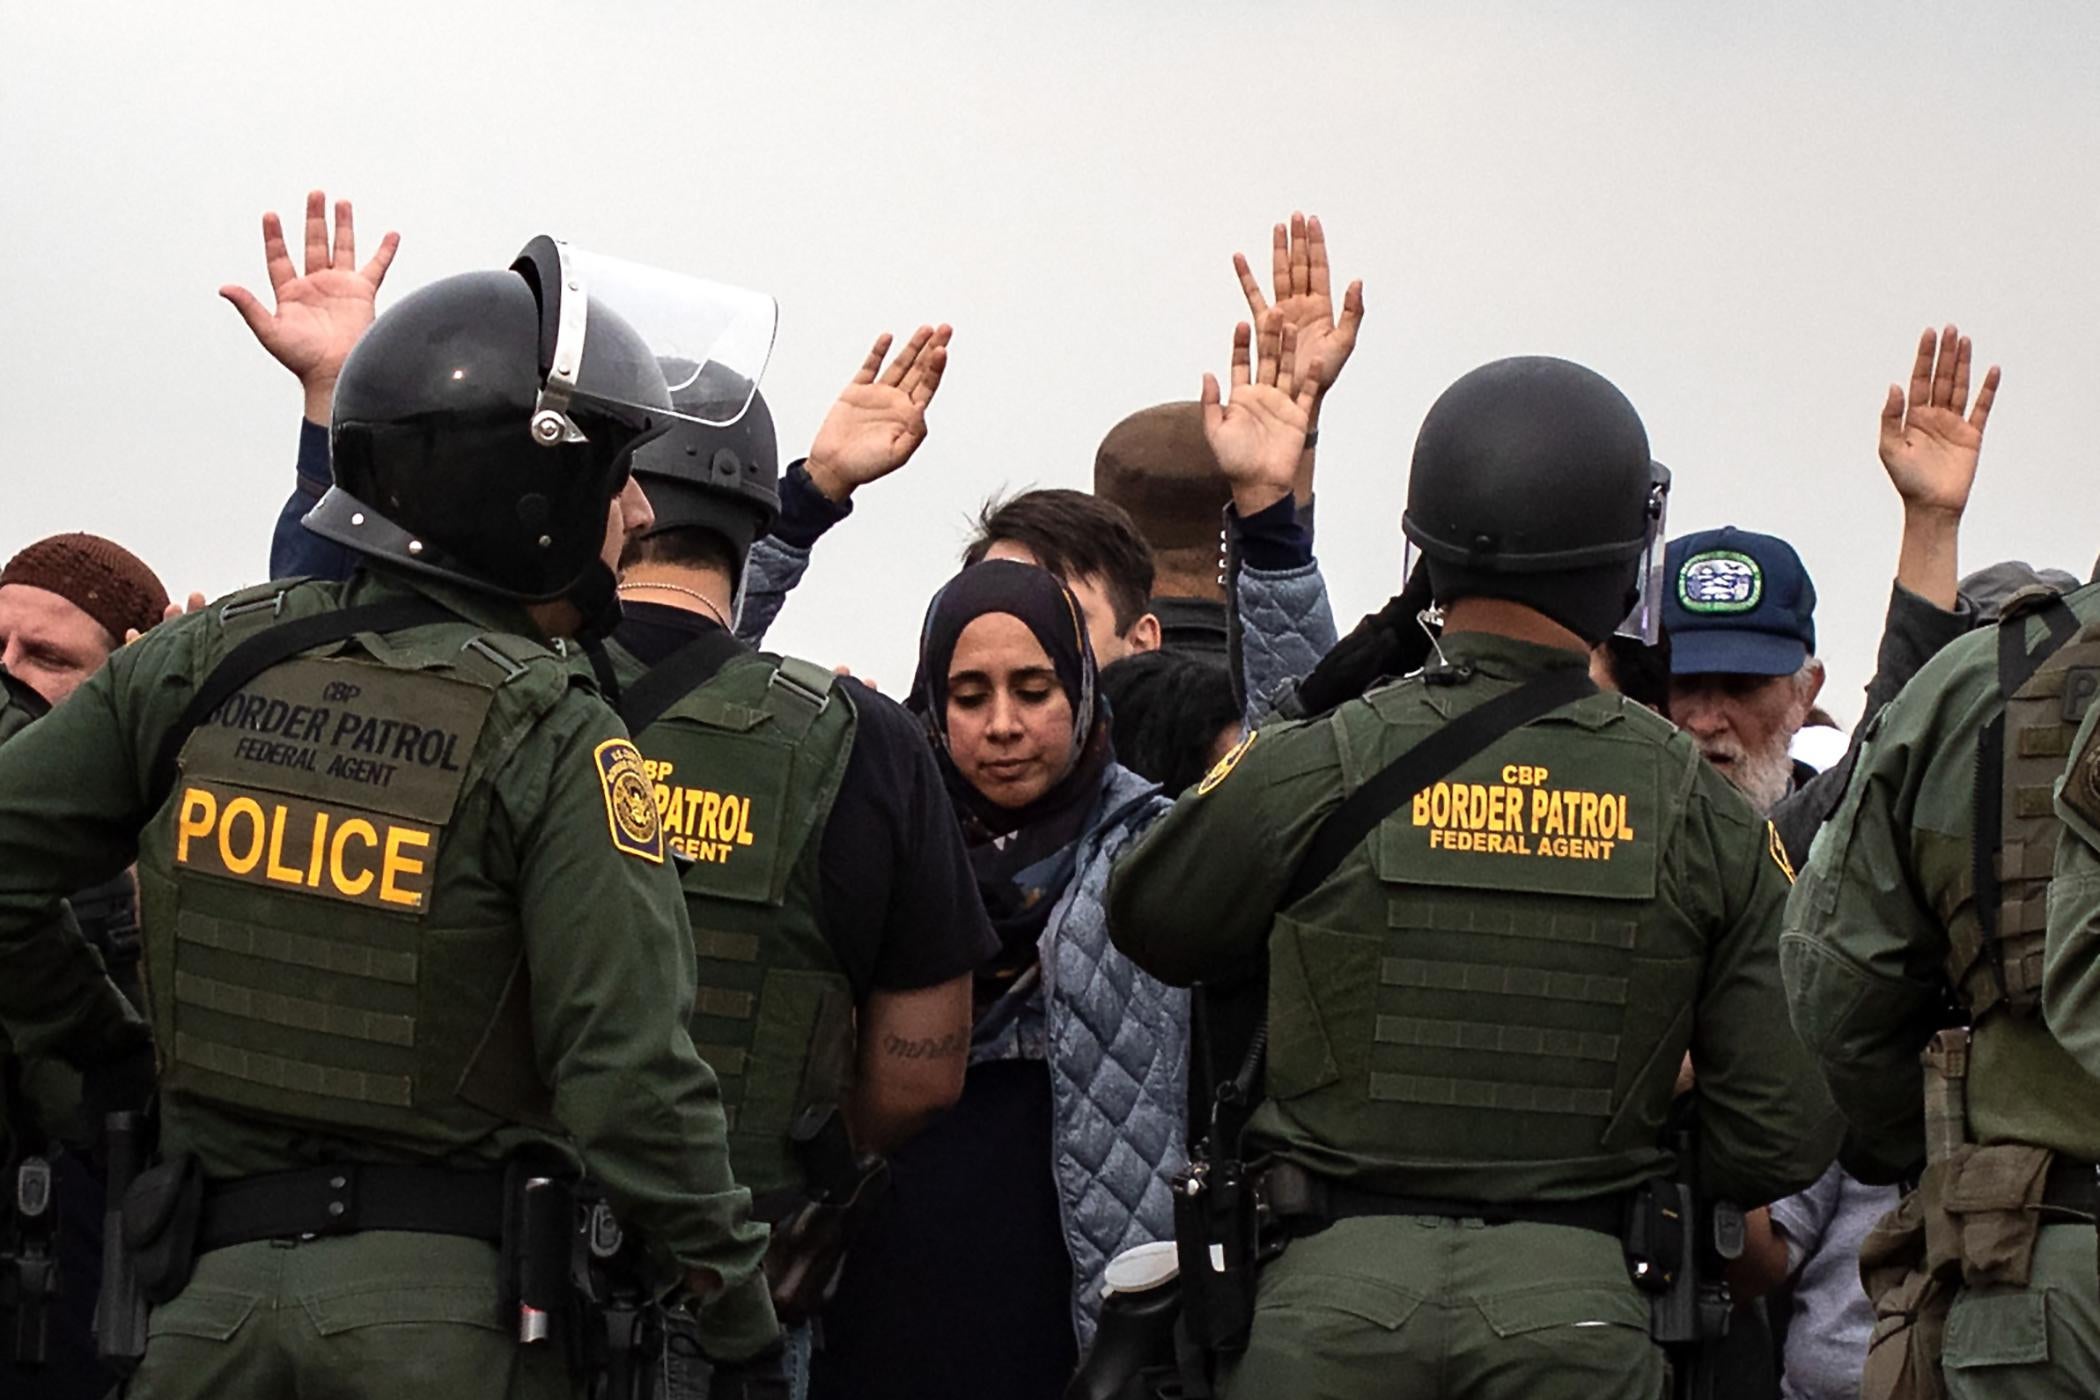 Demonstrators look down and hold their hands in the air. A line of border patrol agents in uniform stand in front of them.